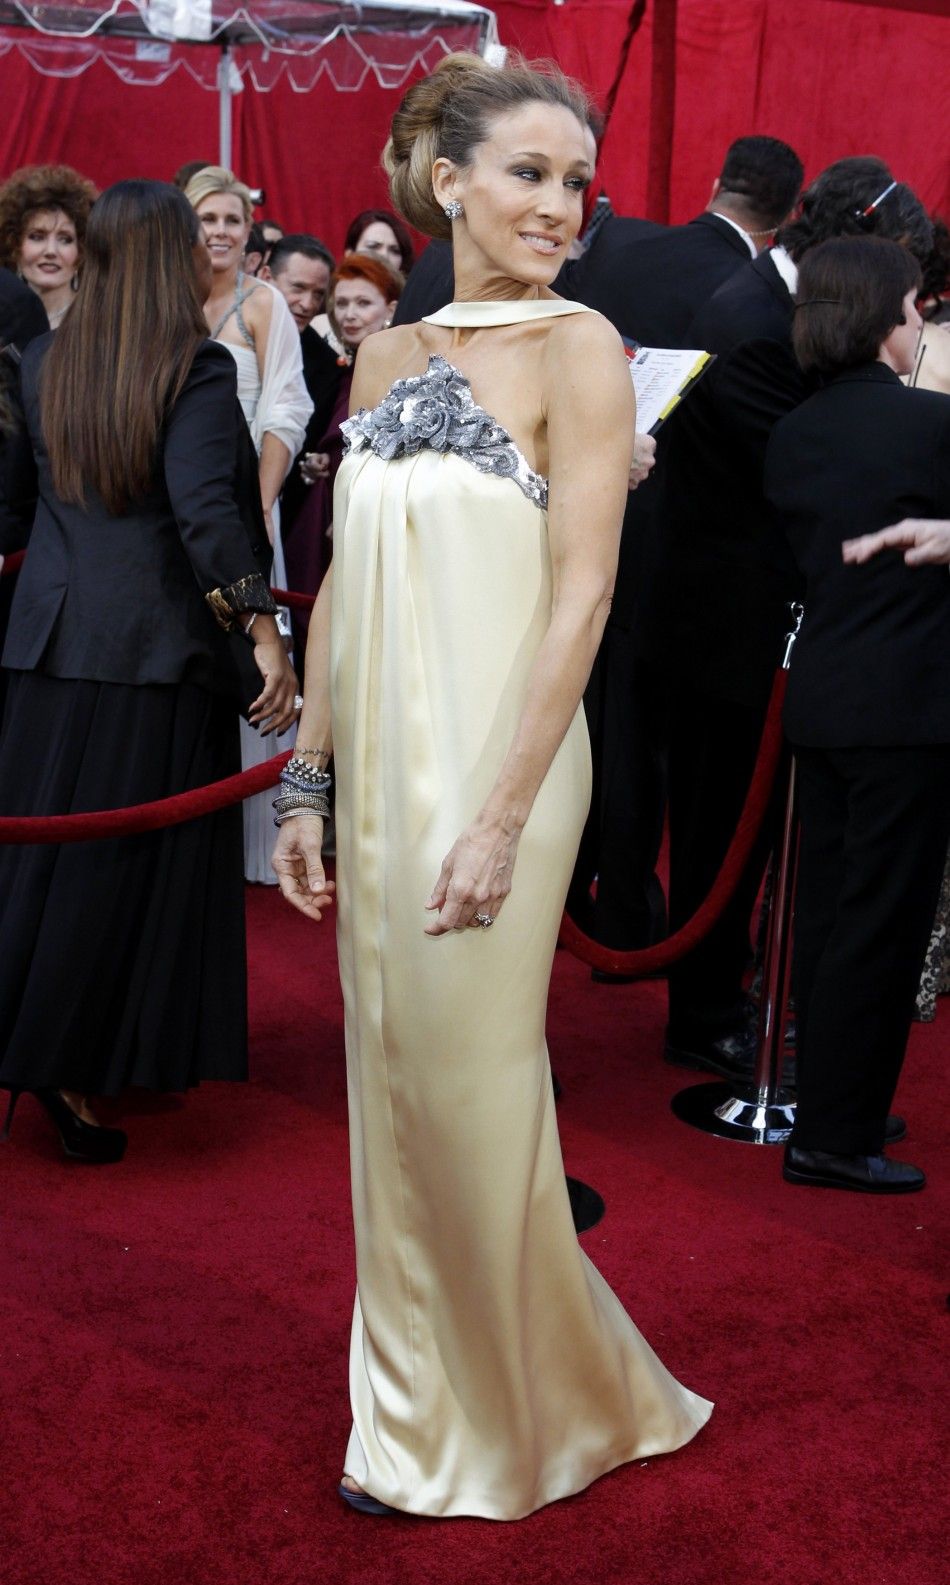 Sarah Jessica Parker arrives at the 82nd Academy Awards in Hollywood